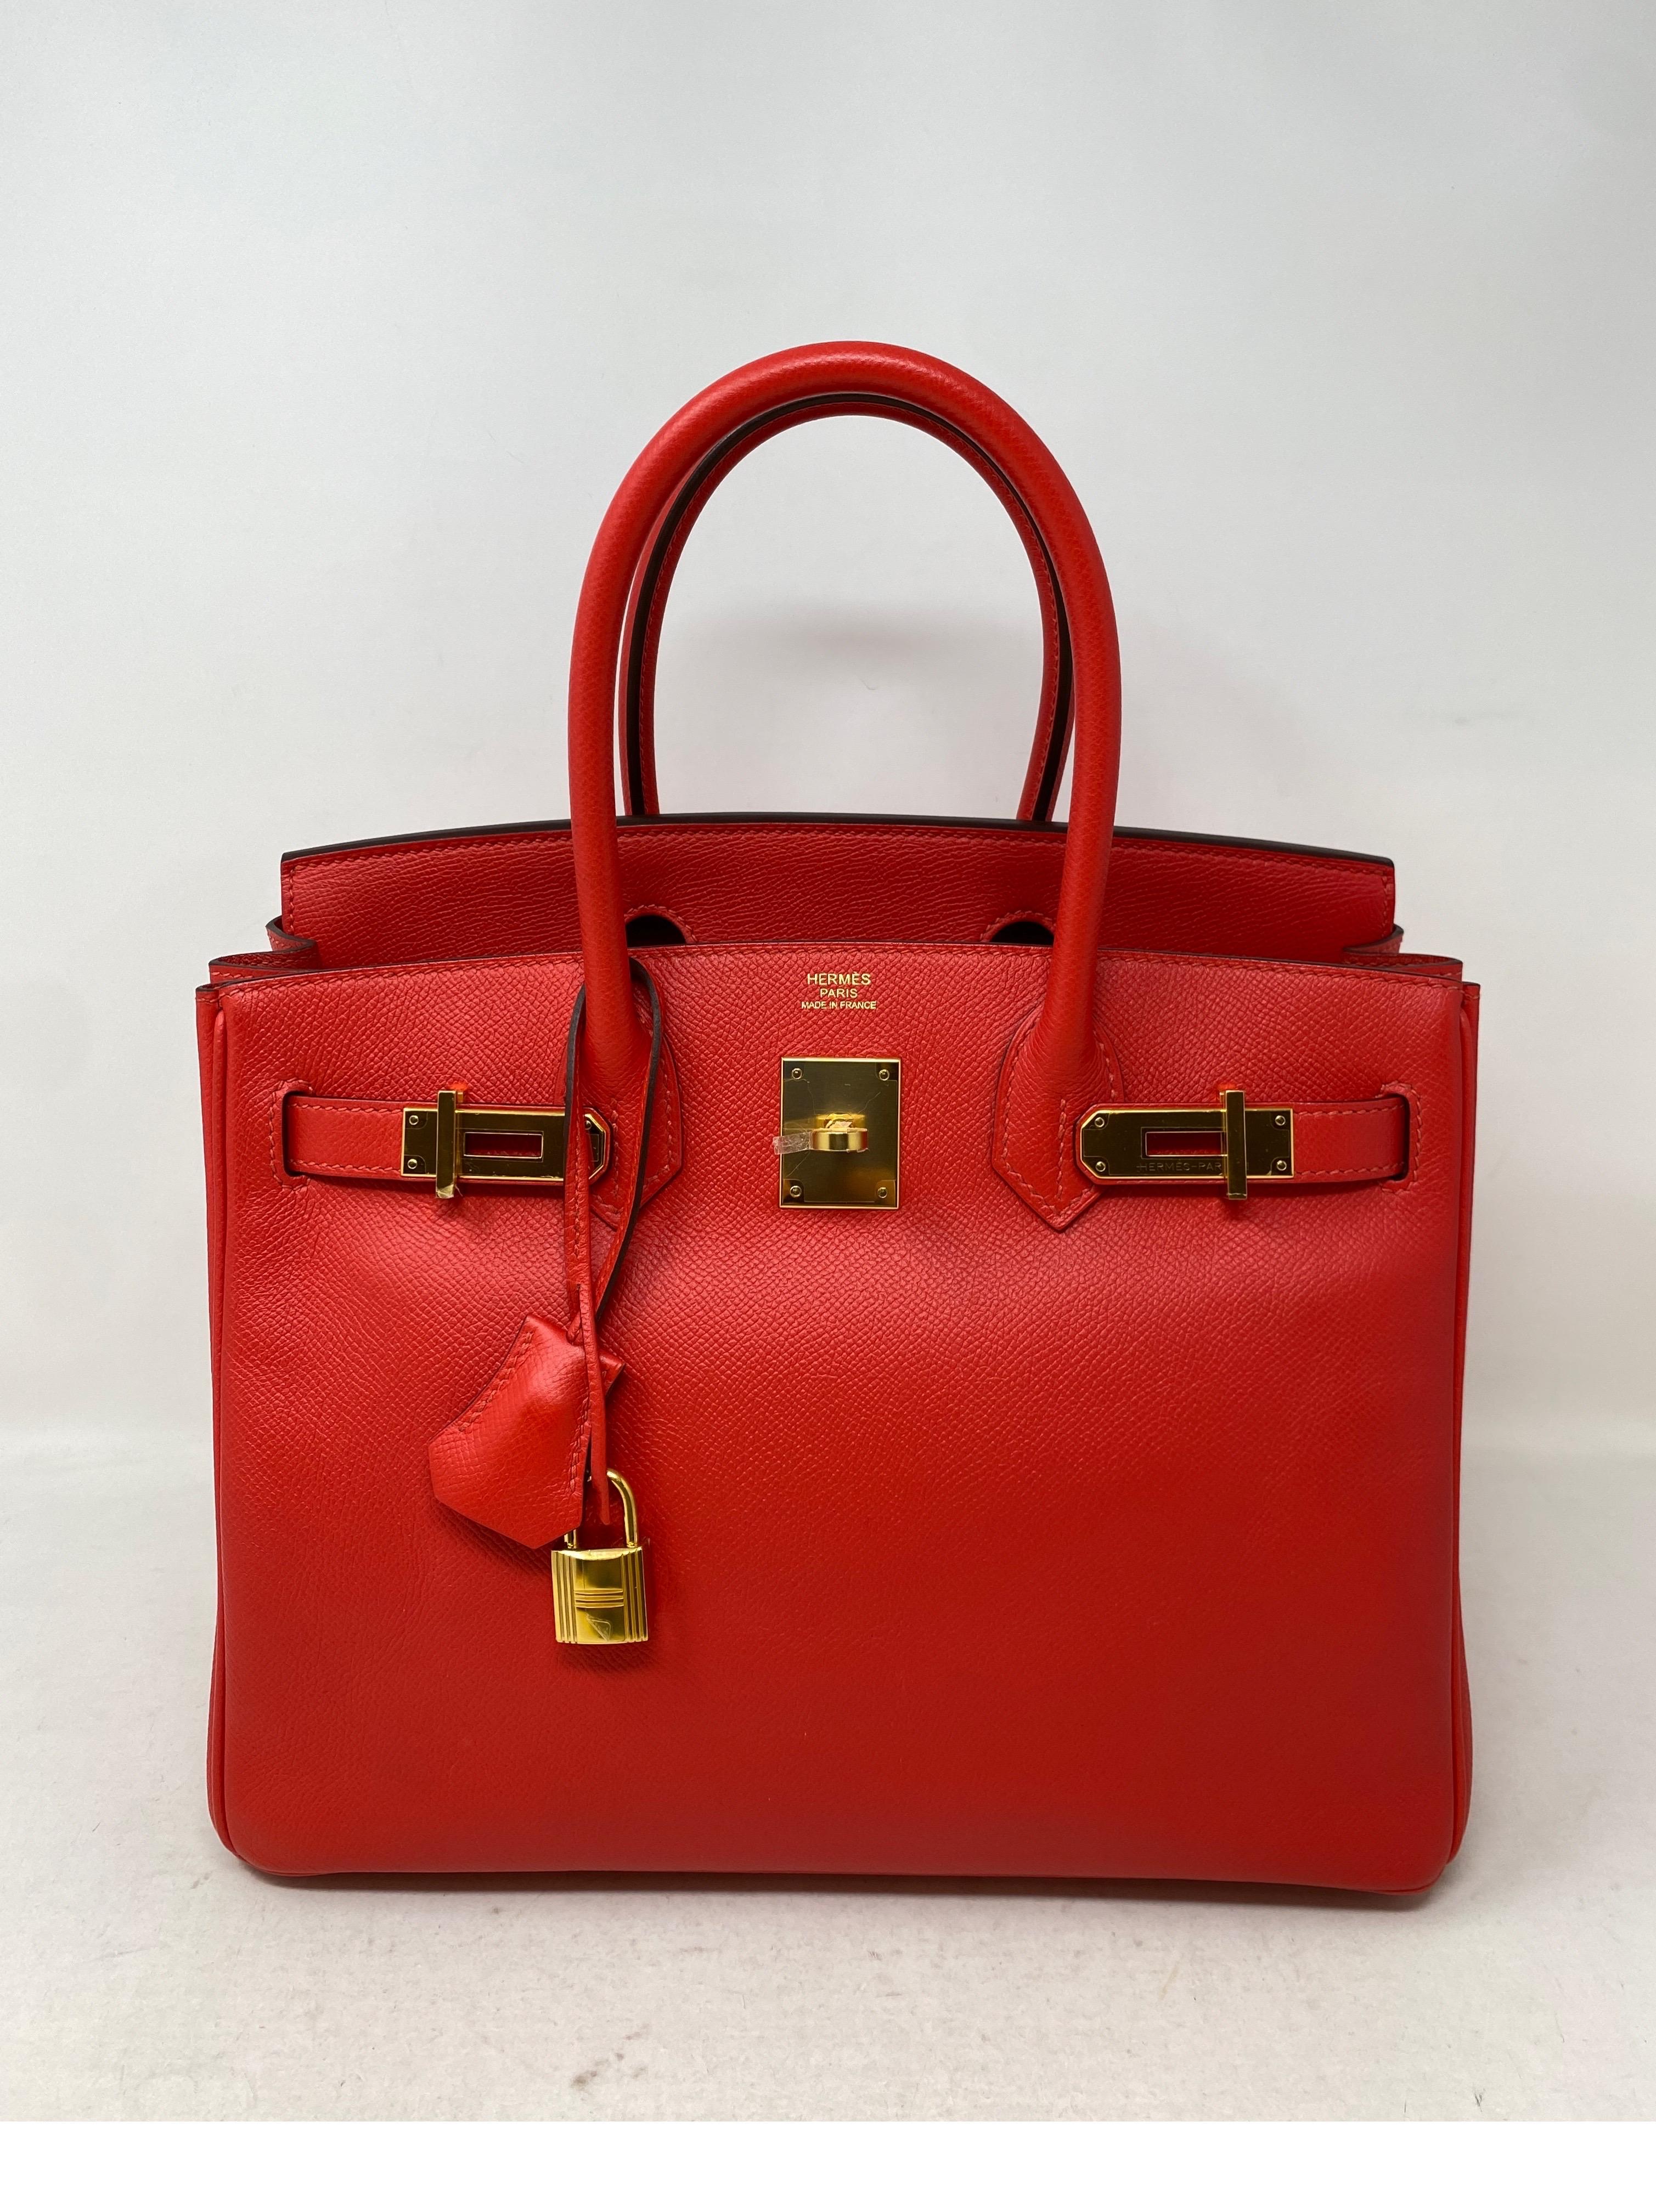 Hermes Rouge Tomate Birkin 30 Bag. Beautiful bright red color Birkin. The most wanted size 30. Epsom leather with gold hardware. Stunning combination. The red color of the season. Don't miss out. Looks like new condition. Excellent exterior with